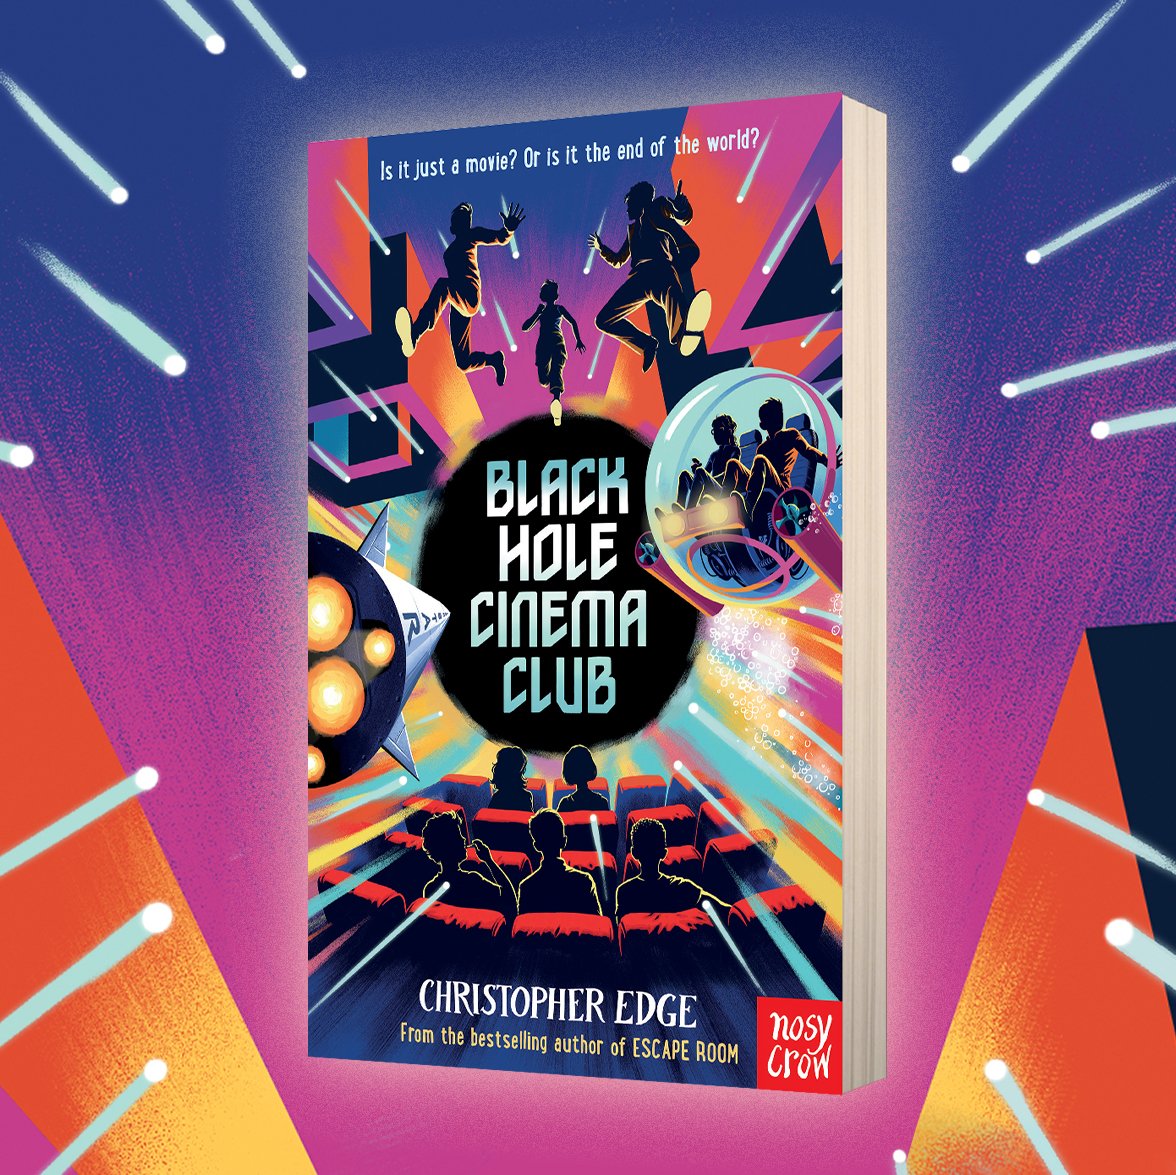 Ratings and reviews really help readers to find new books, so if you've read BLACK HOLE CINEMA CLUB and felt able to leave a rating or a brief review, I'd really appreciate this. Thank you! amazon.co.uk/gp/aw/d/183994…